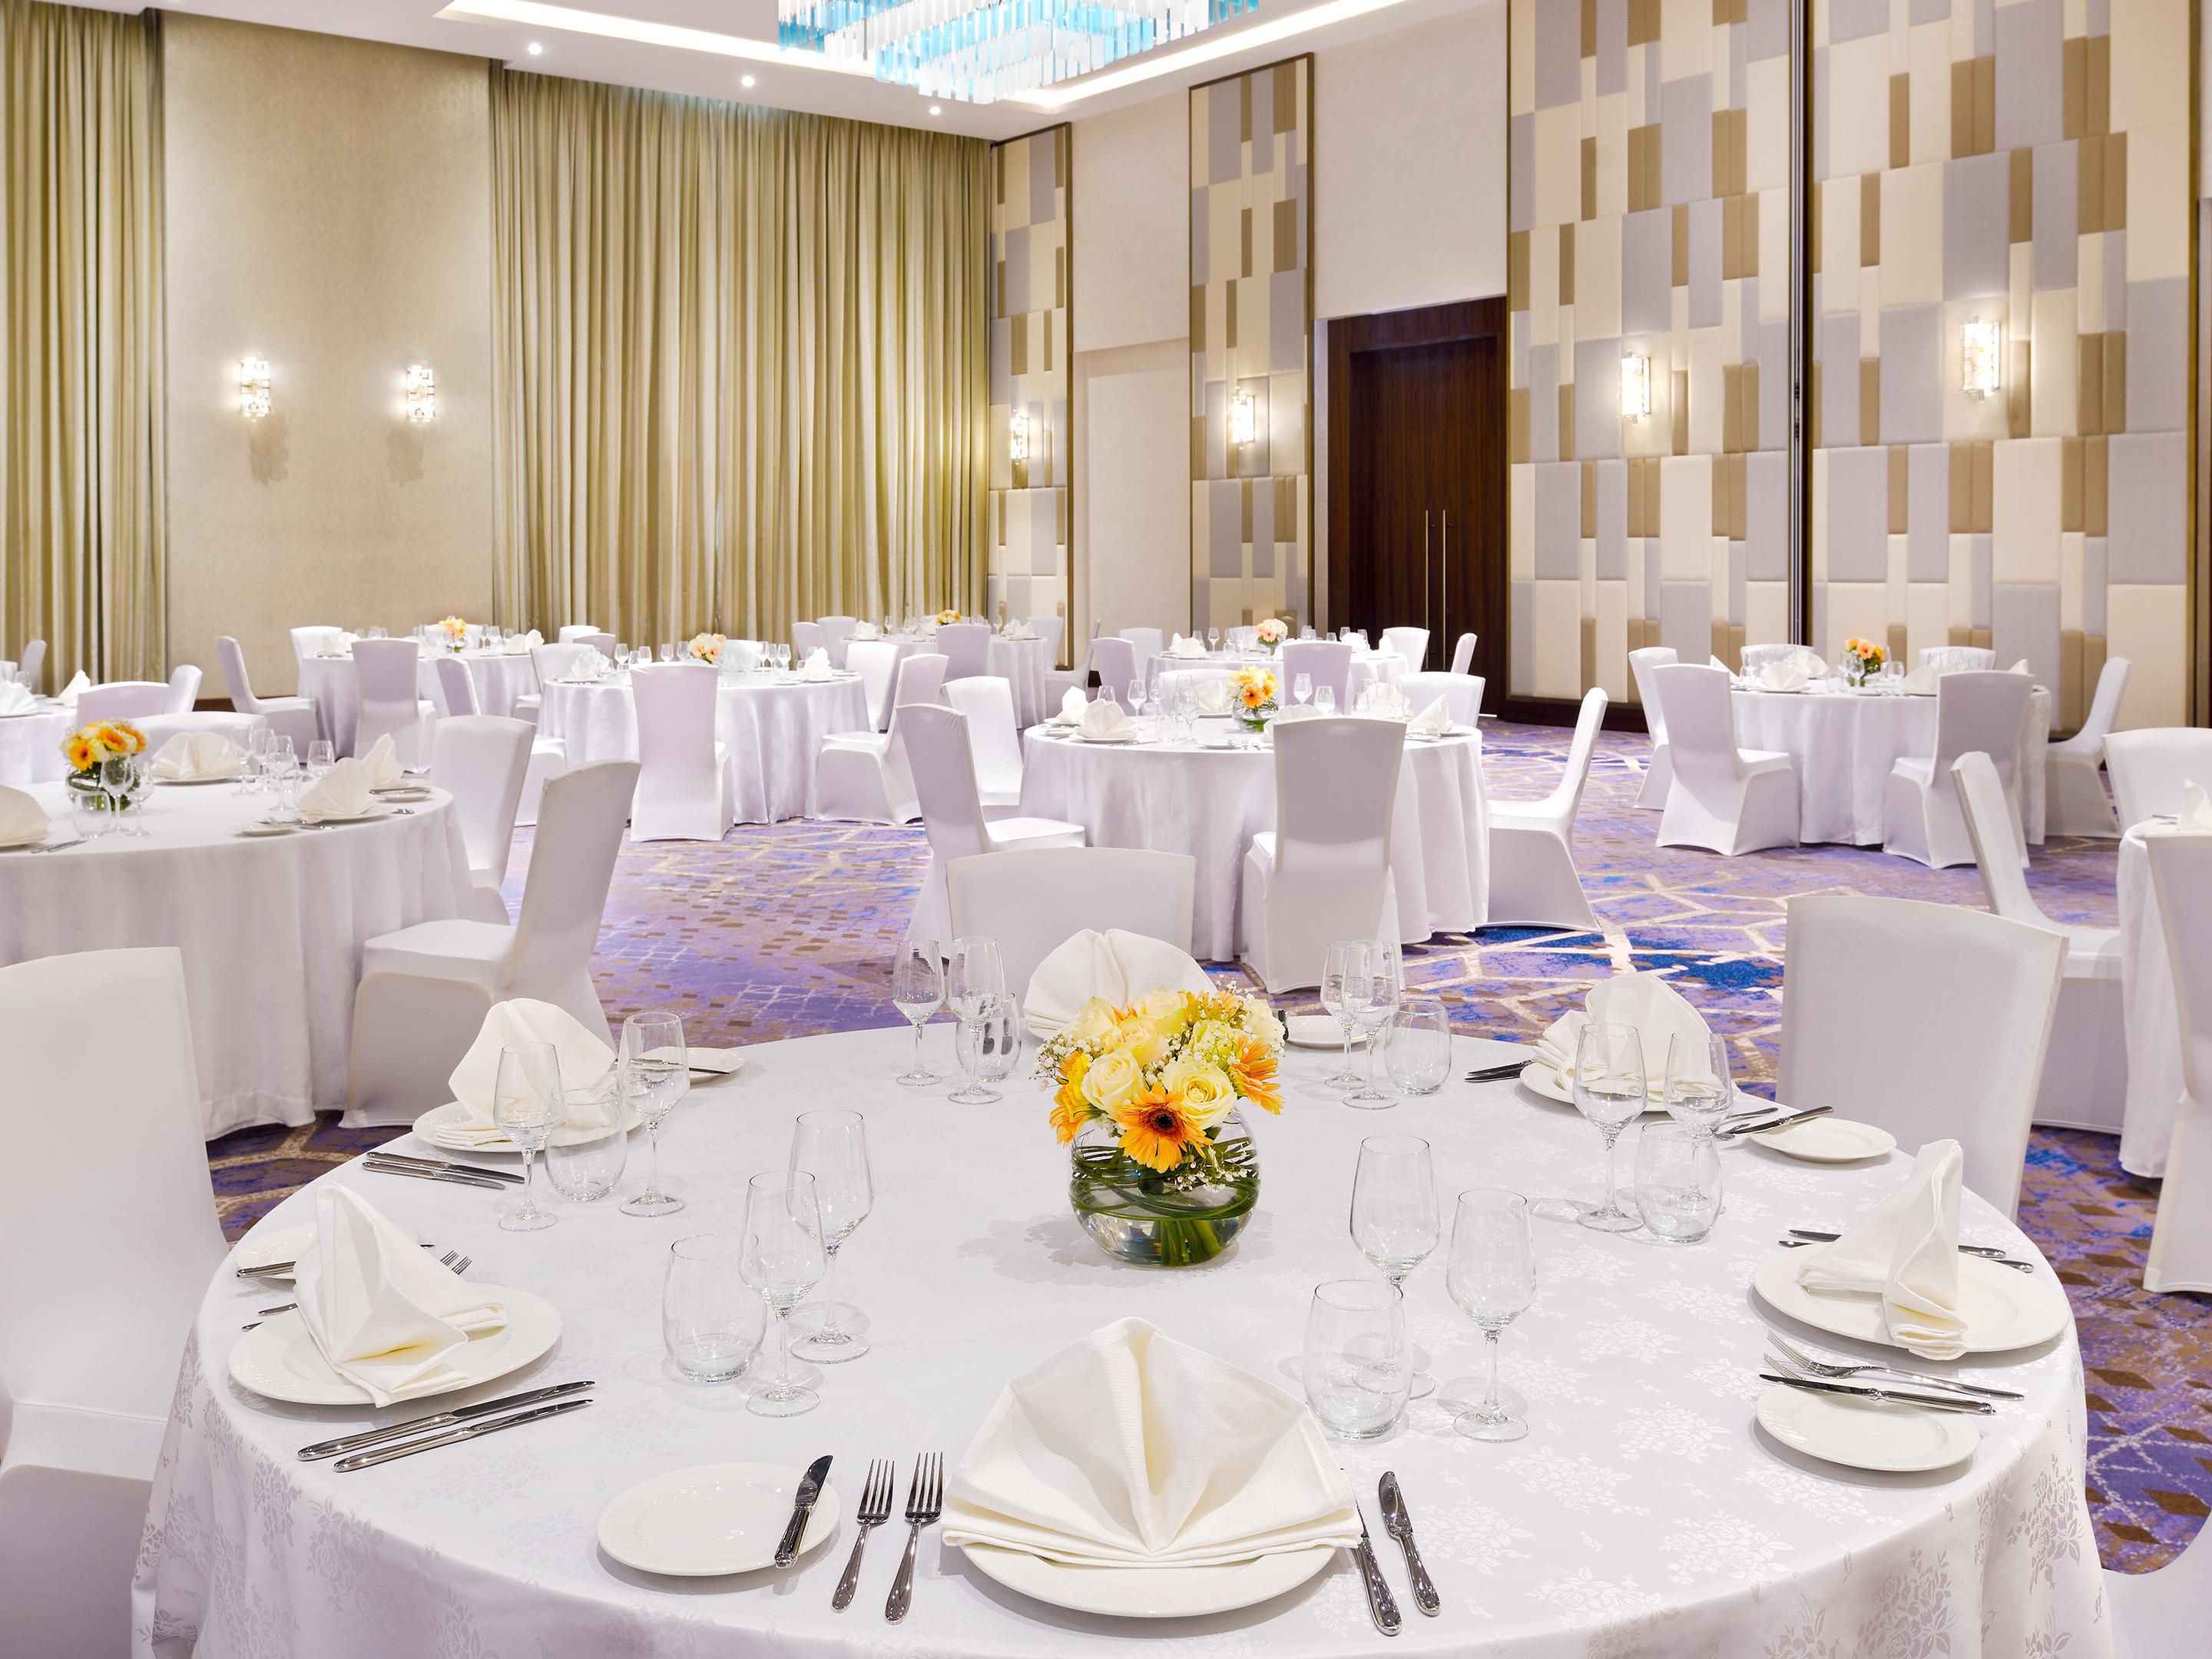 The hotel offers 658 sq m of meeting space, which can be divided into four meeting rooms. The hotel's meeting facilities also feature a 460 sq m pillar-less ballroom with a 6.2-meter-high ceiling, and a room specially designed for creative workshops, weddings, and much more. 
Its efficient design creates a relaxing, luminous atmosphere. 